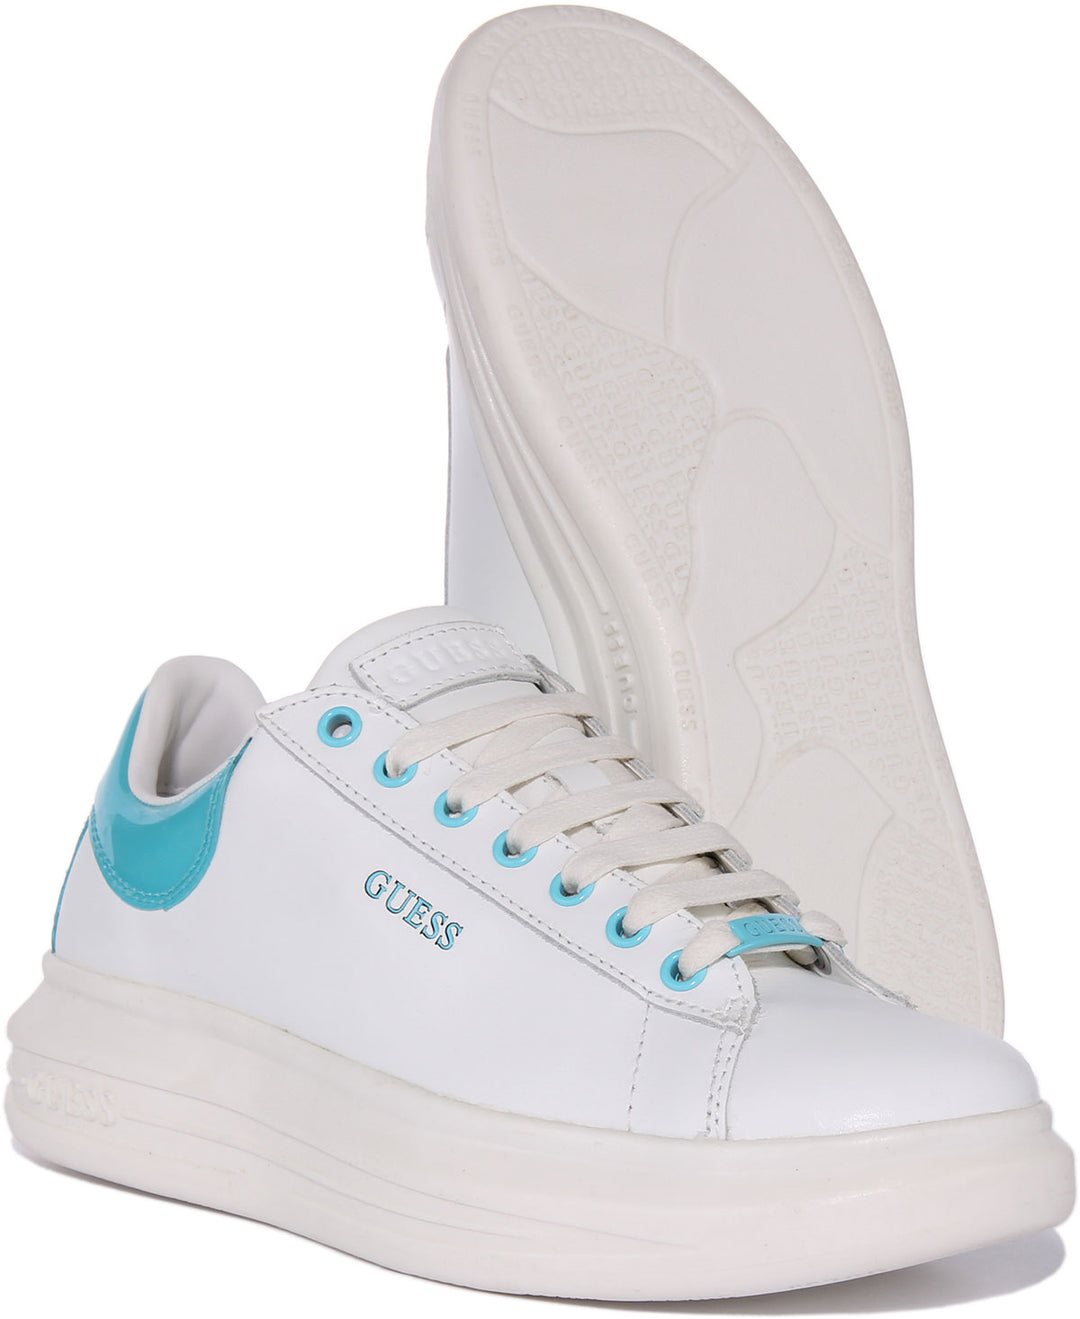 Guess Vibo Trainer In White Blue For Women